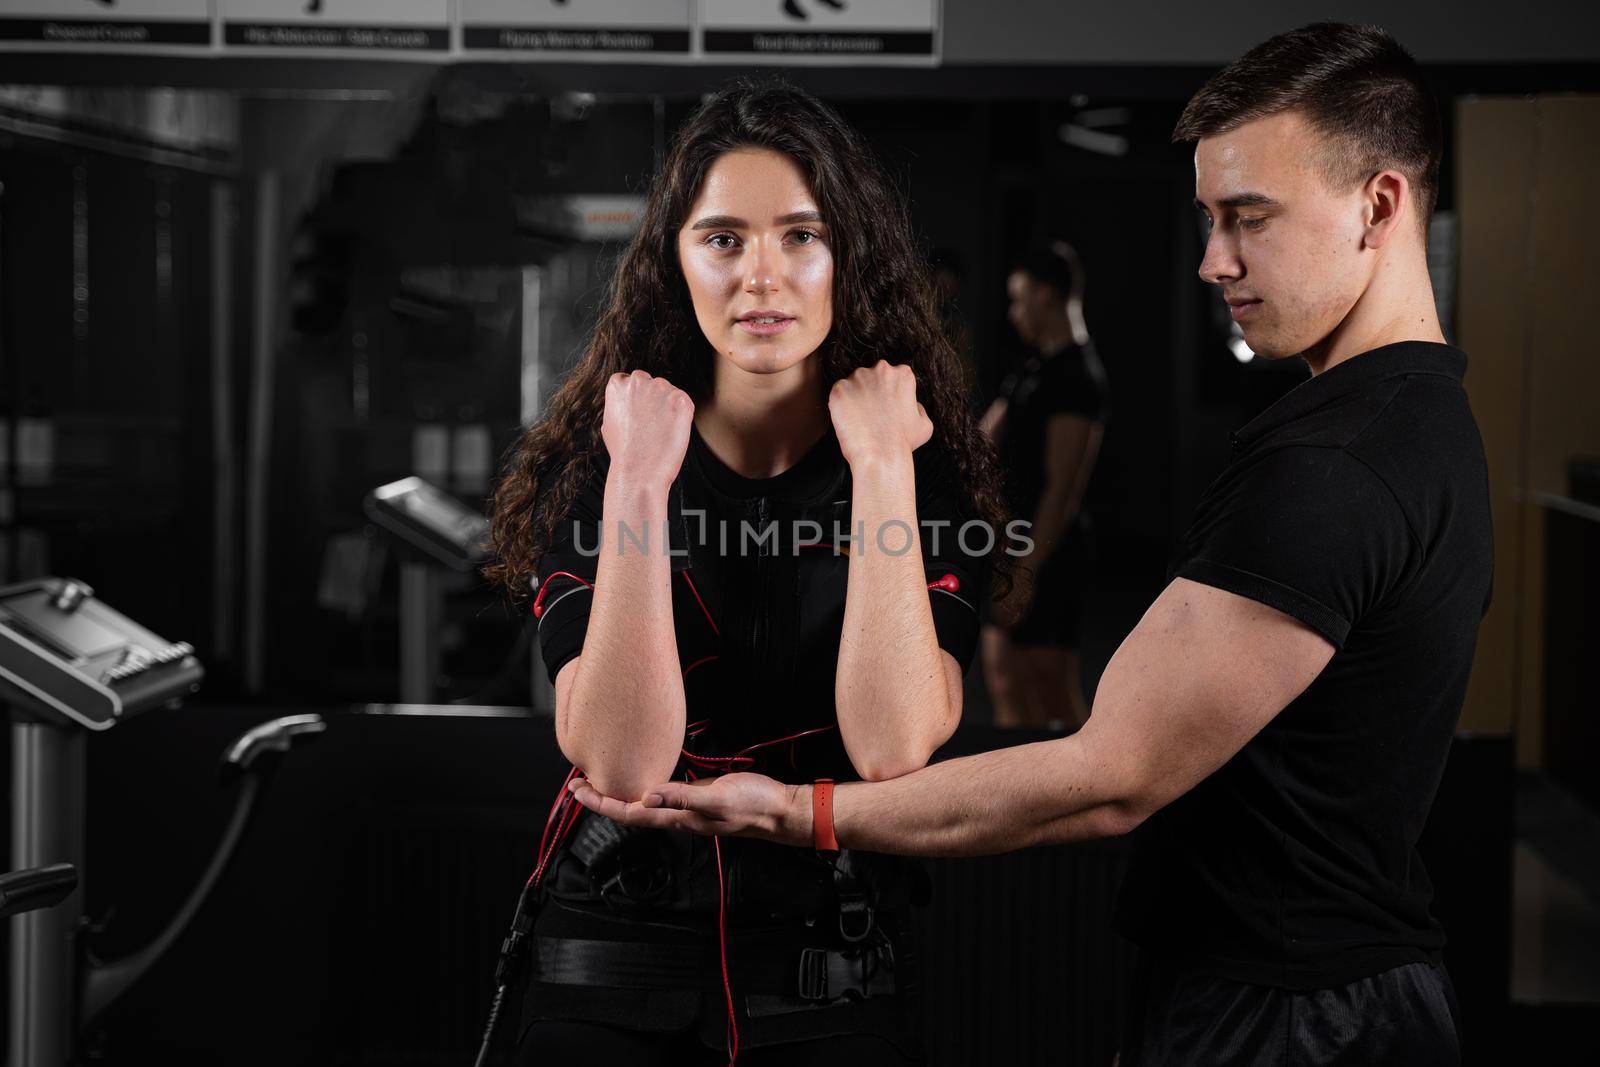 Man trainer trains a girl in an EMS suit in the gym. Electrical stimulation of the misc during active training by Rabizo